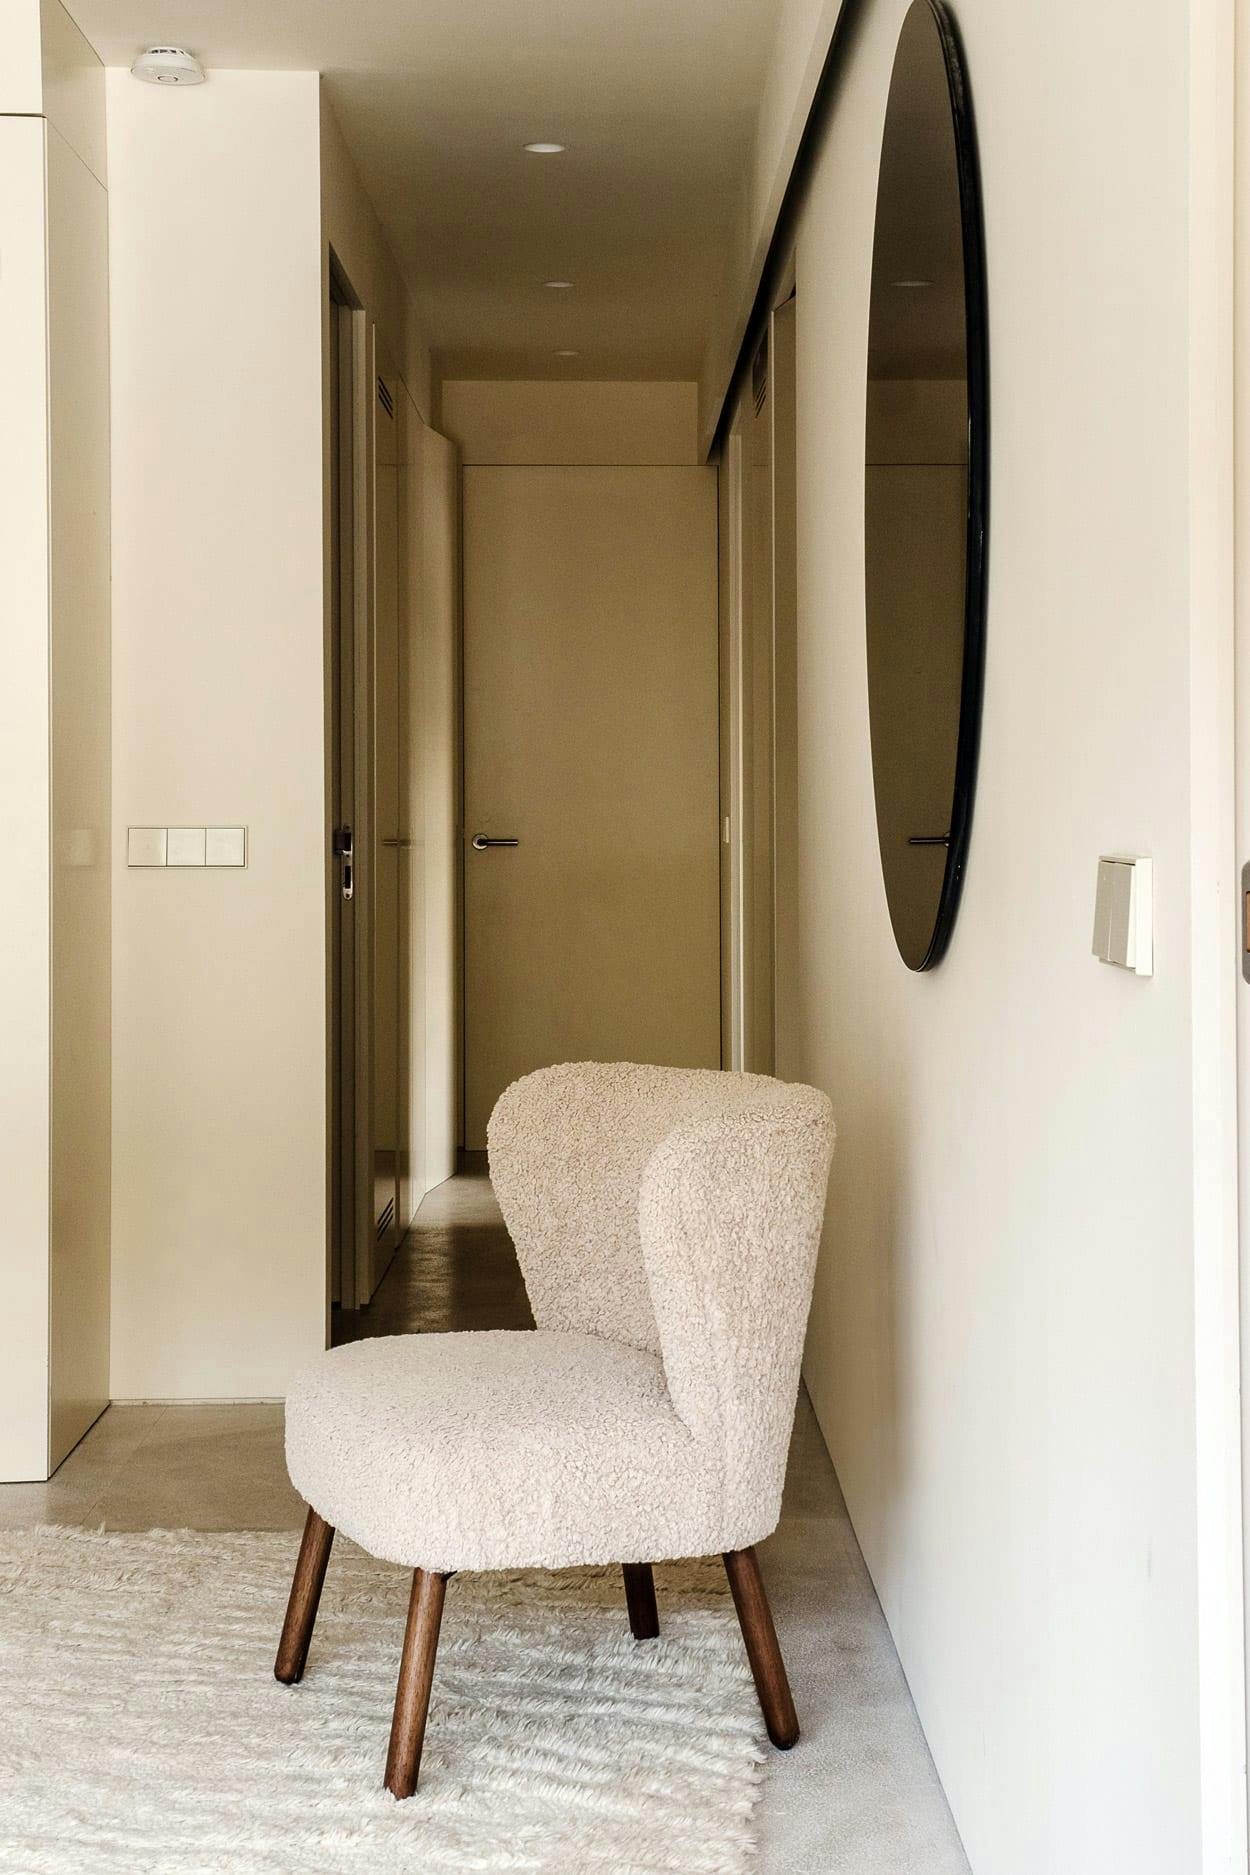 A white chair is sitting in a hallway, with a mirror above it, in a clean and empty room.